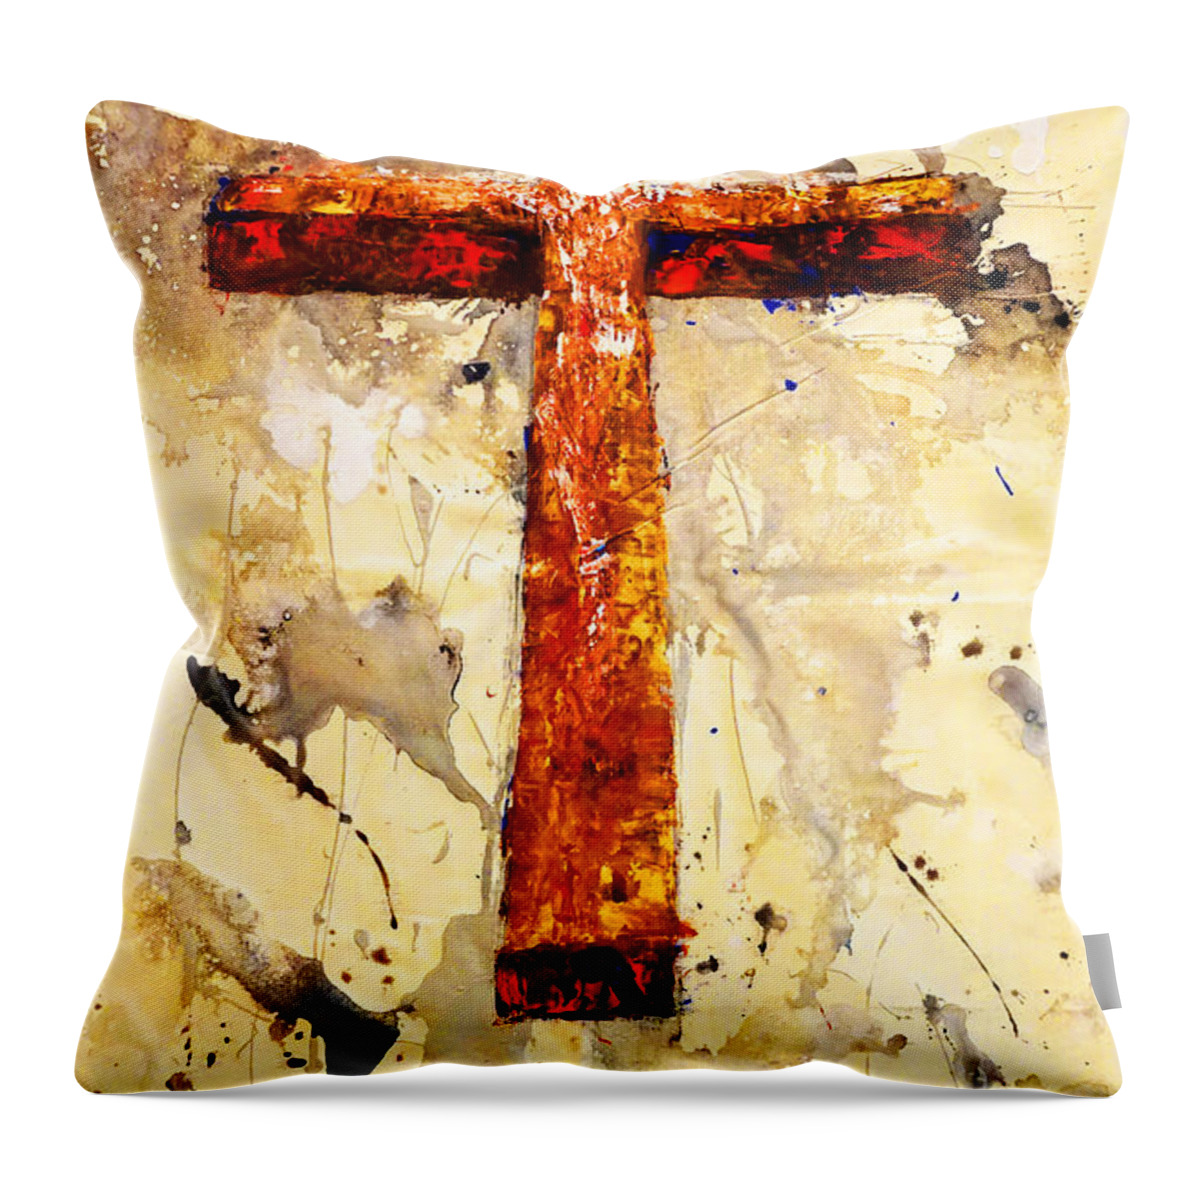 Rugged Throw Pillow featuring the painting On that old rugged Cross by Giorgio Tuscani